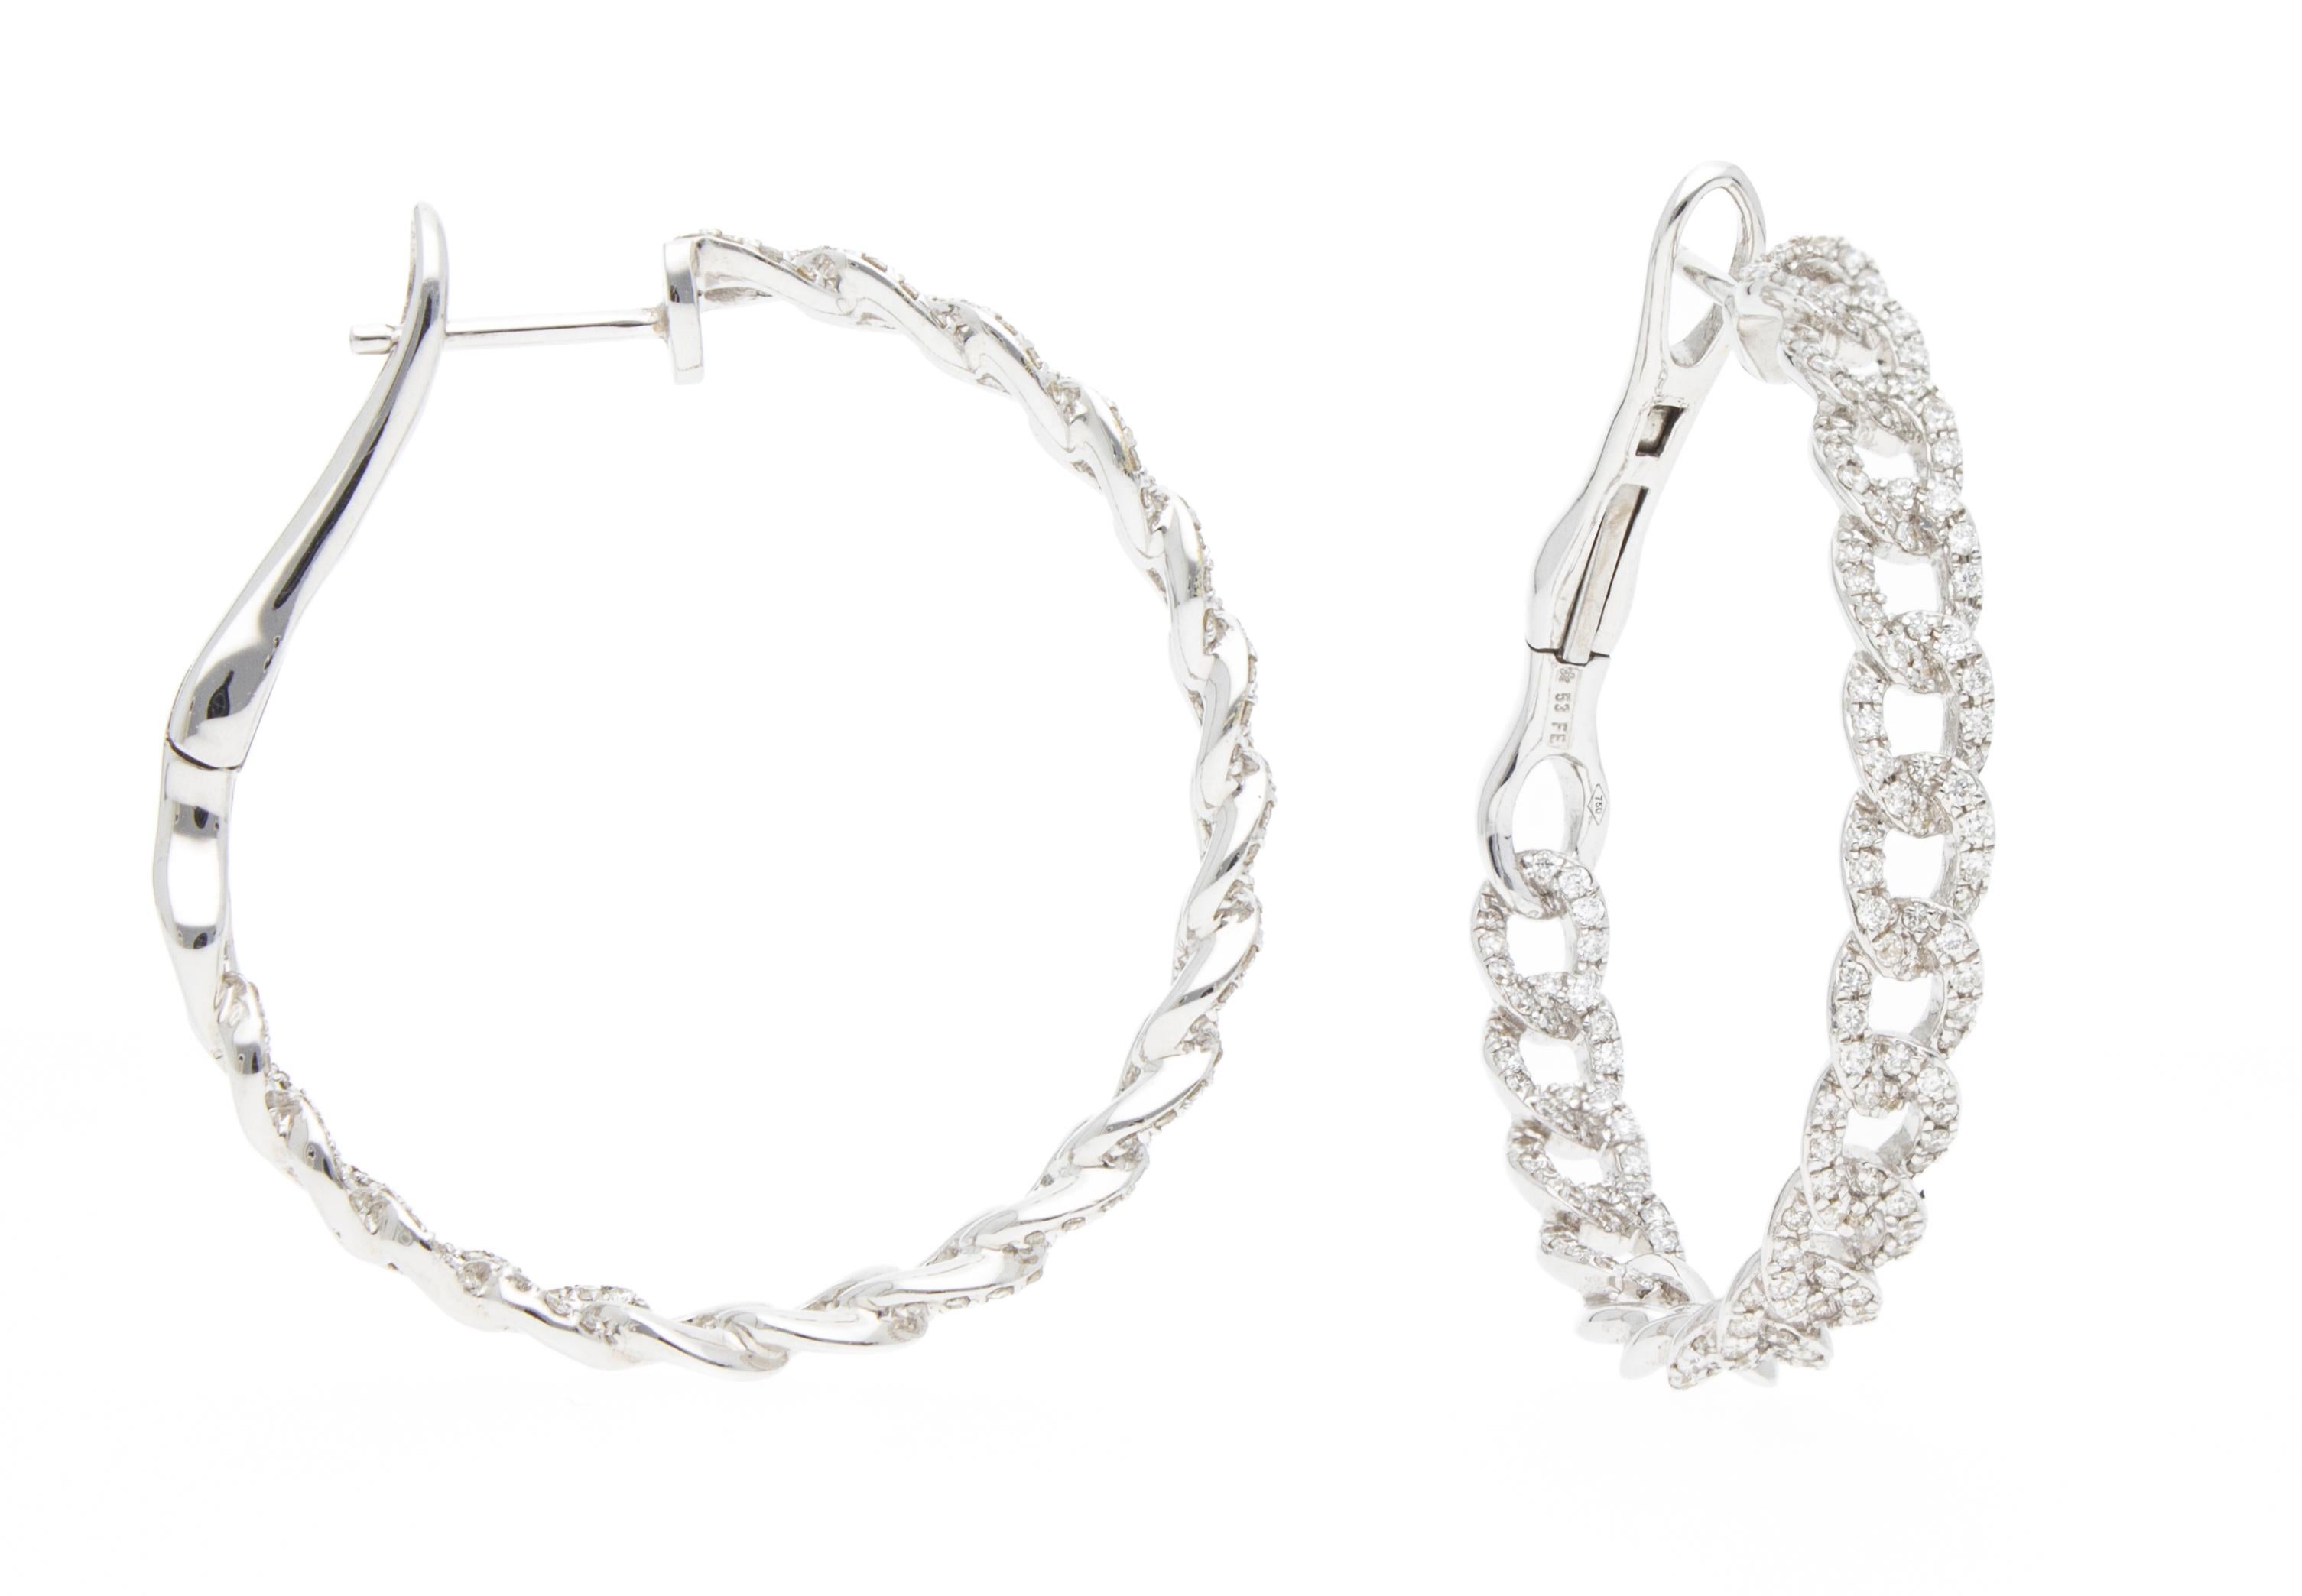 The earrings are in the shape of a circle.
The earring design is a circle shaped groumette chain. 
The links of the chain are set with 0.79 ct of diamonds. 
The diamonds are both on the outside of the hoop and on the inside, to allow the earrings to